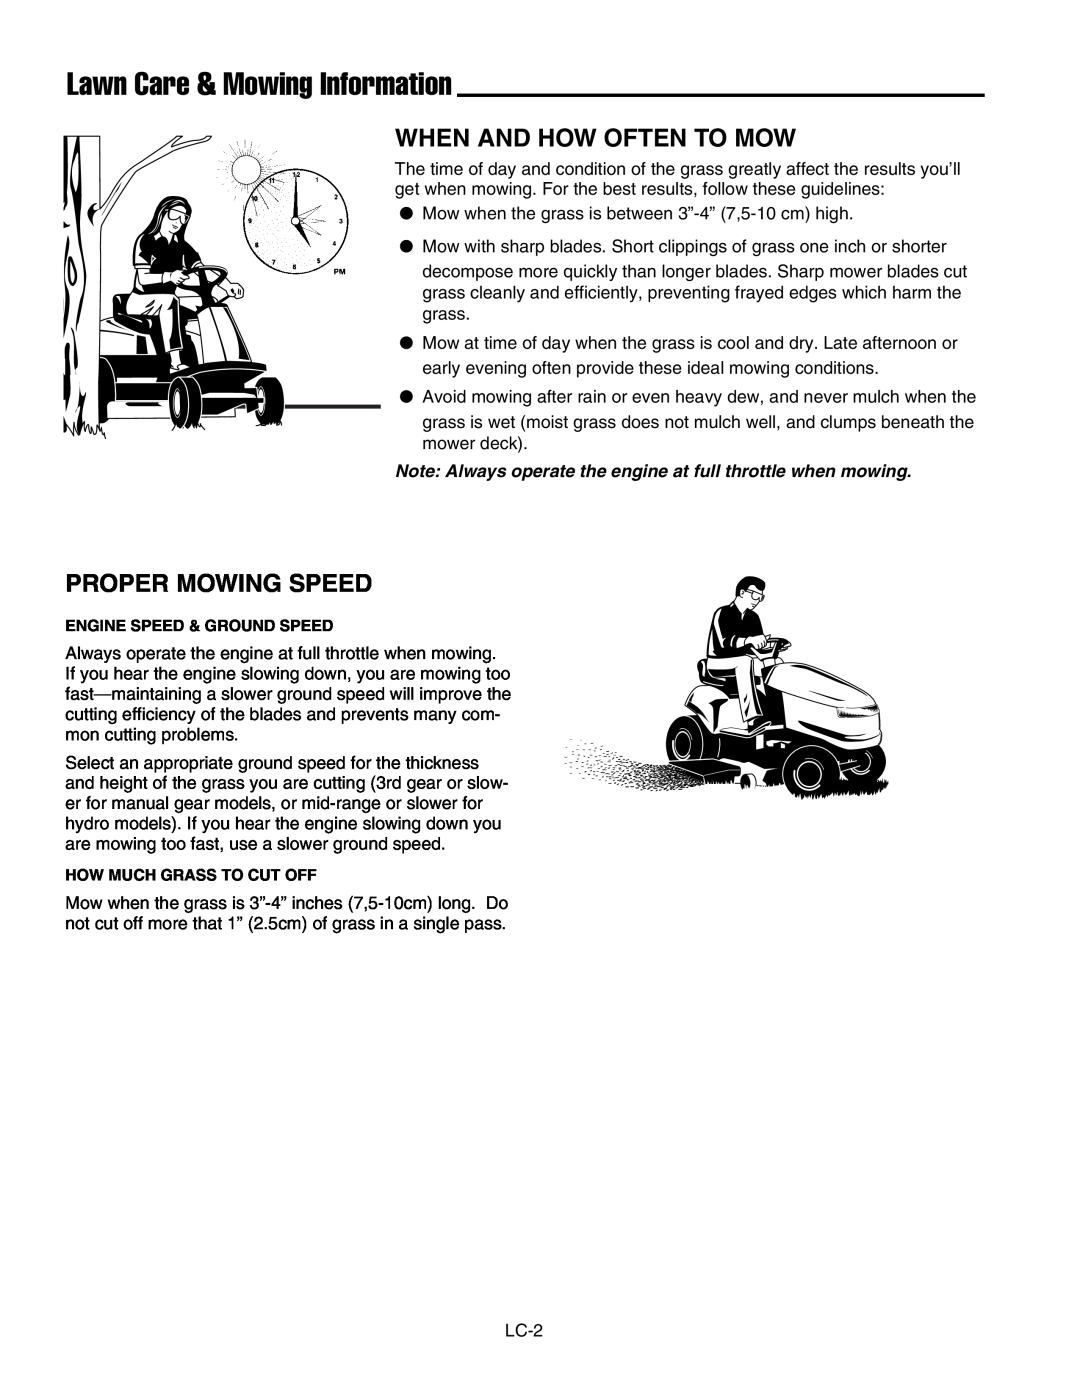 Snapper 150Z ZTR Series manual When And How Often To Mow, Proper Mowing Speed, Lawn Care & Mowing Information 